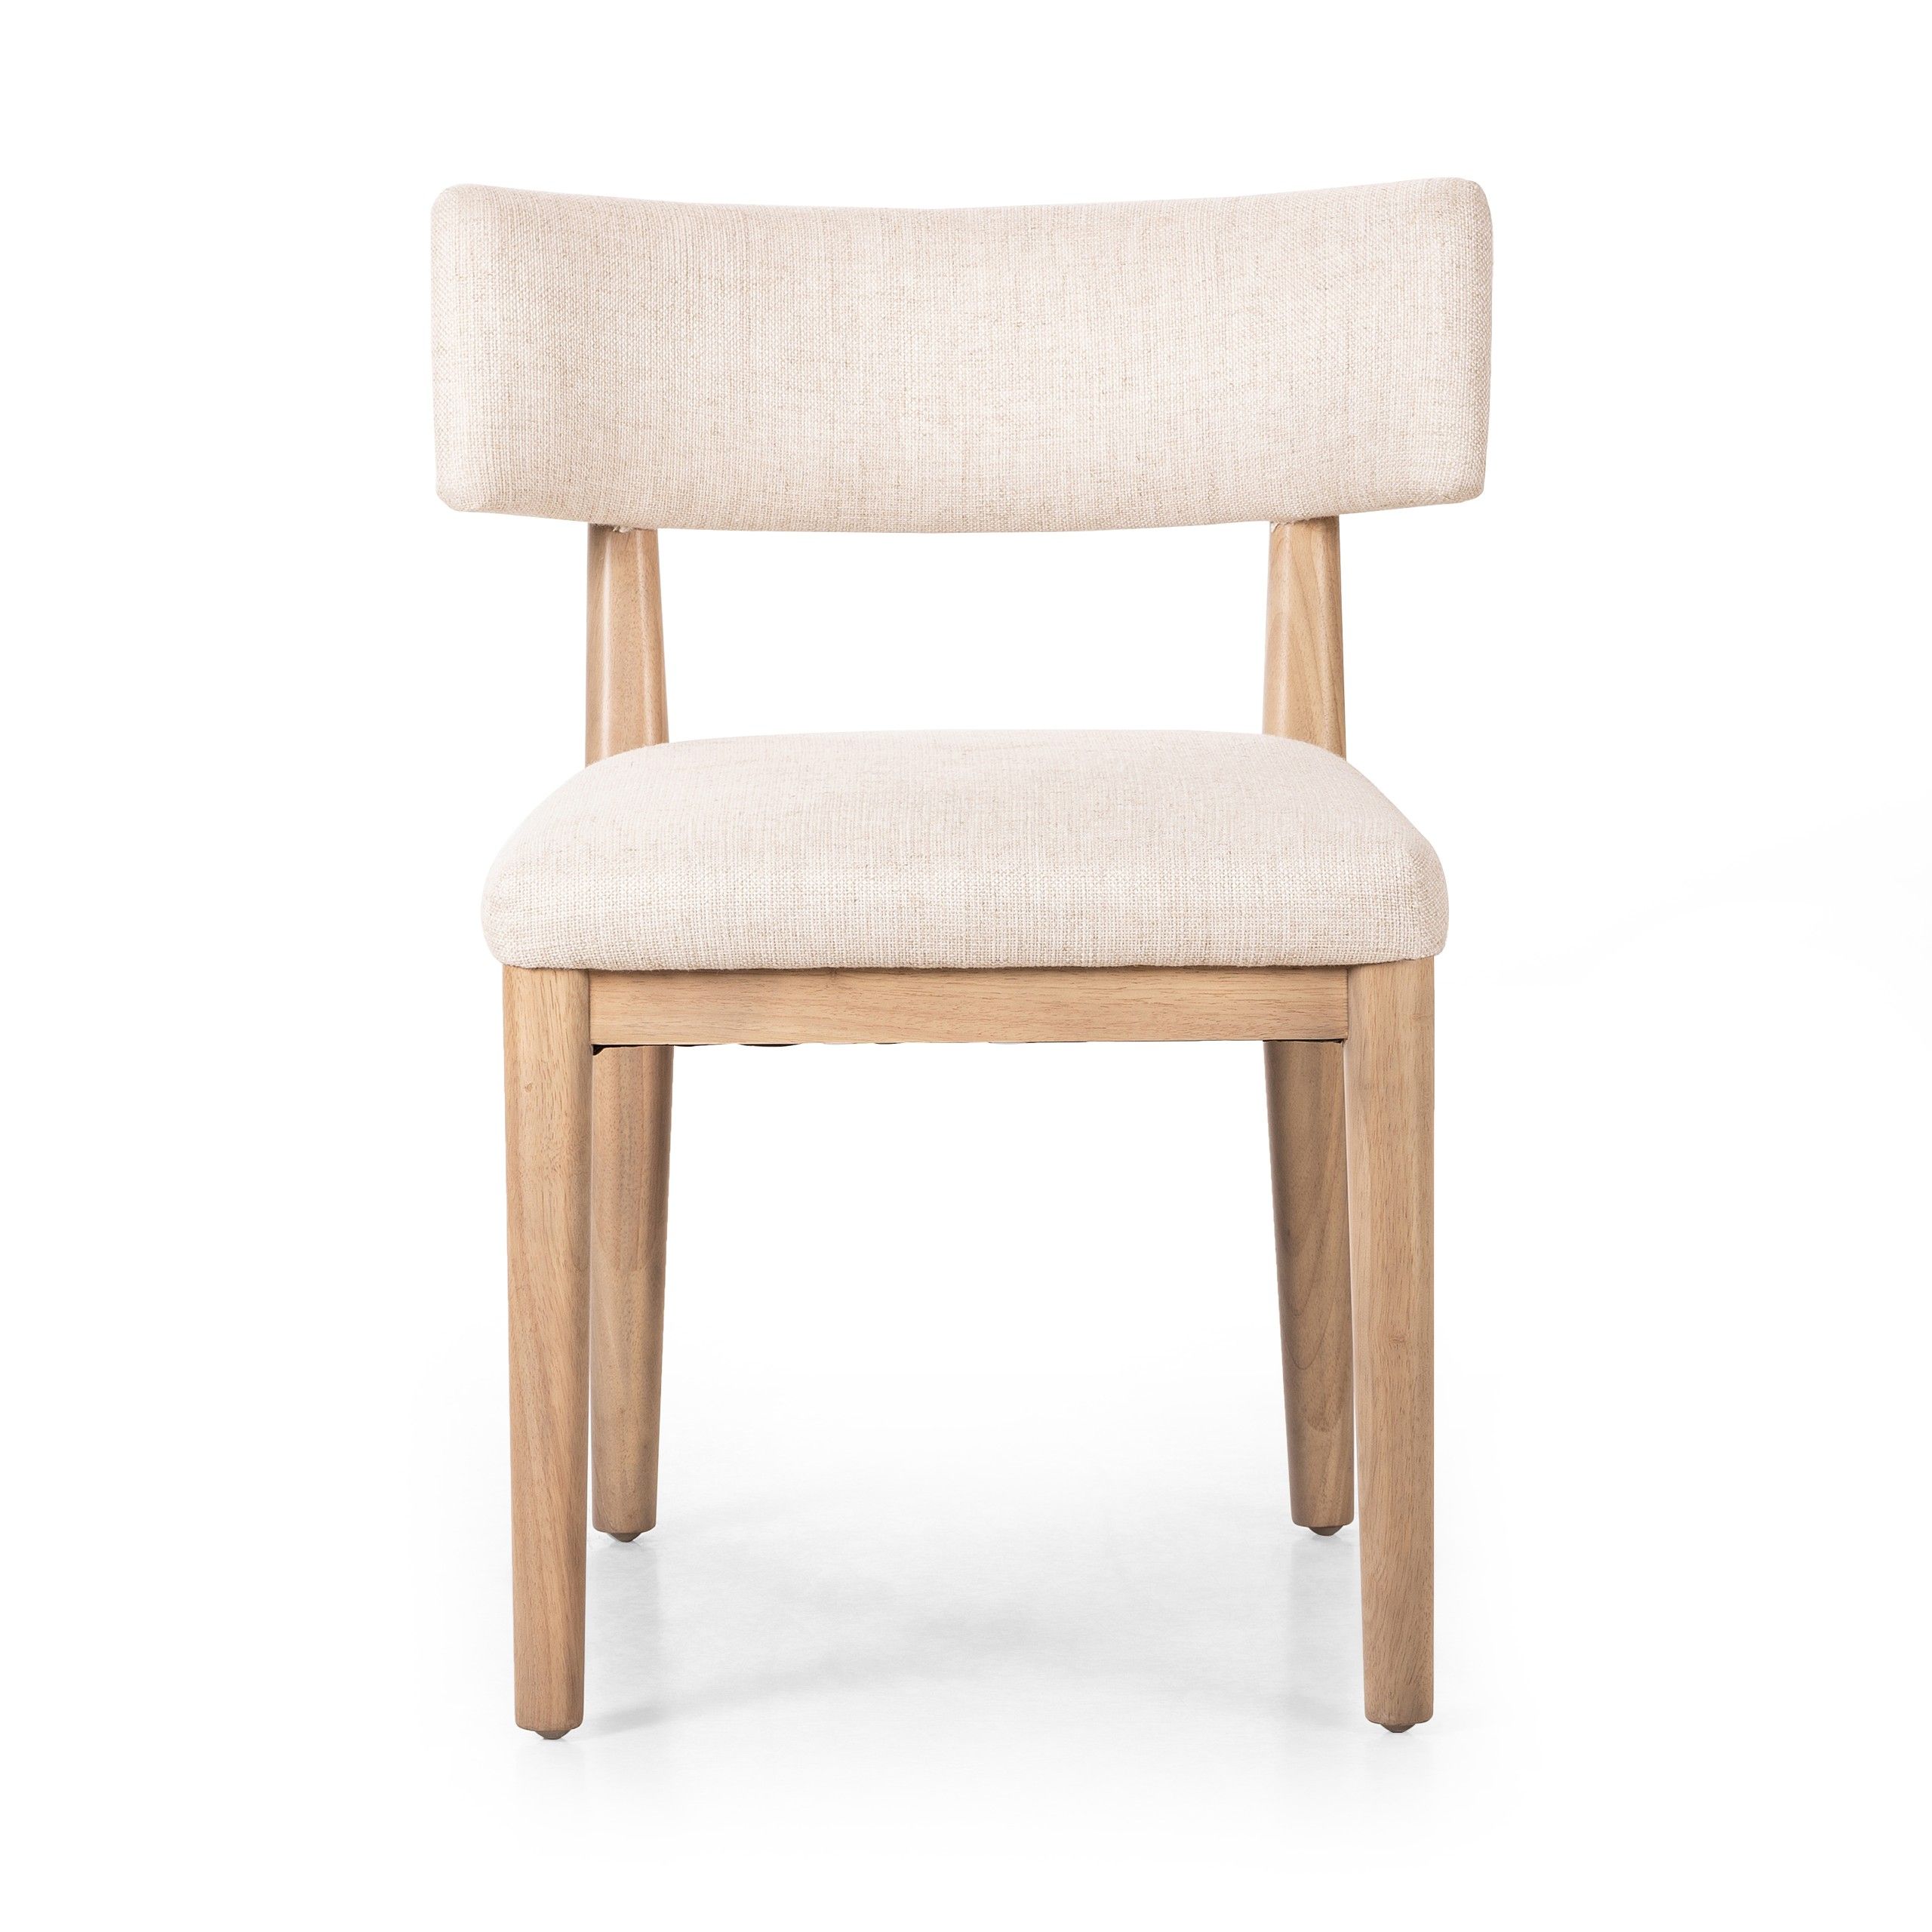 Cardell Dining Chair - Essence Natural front